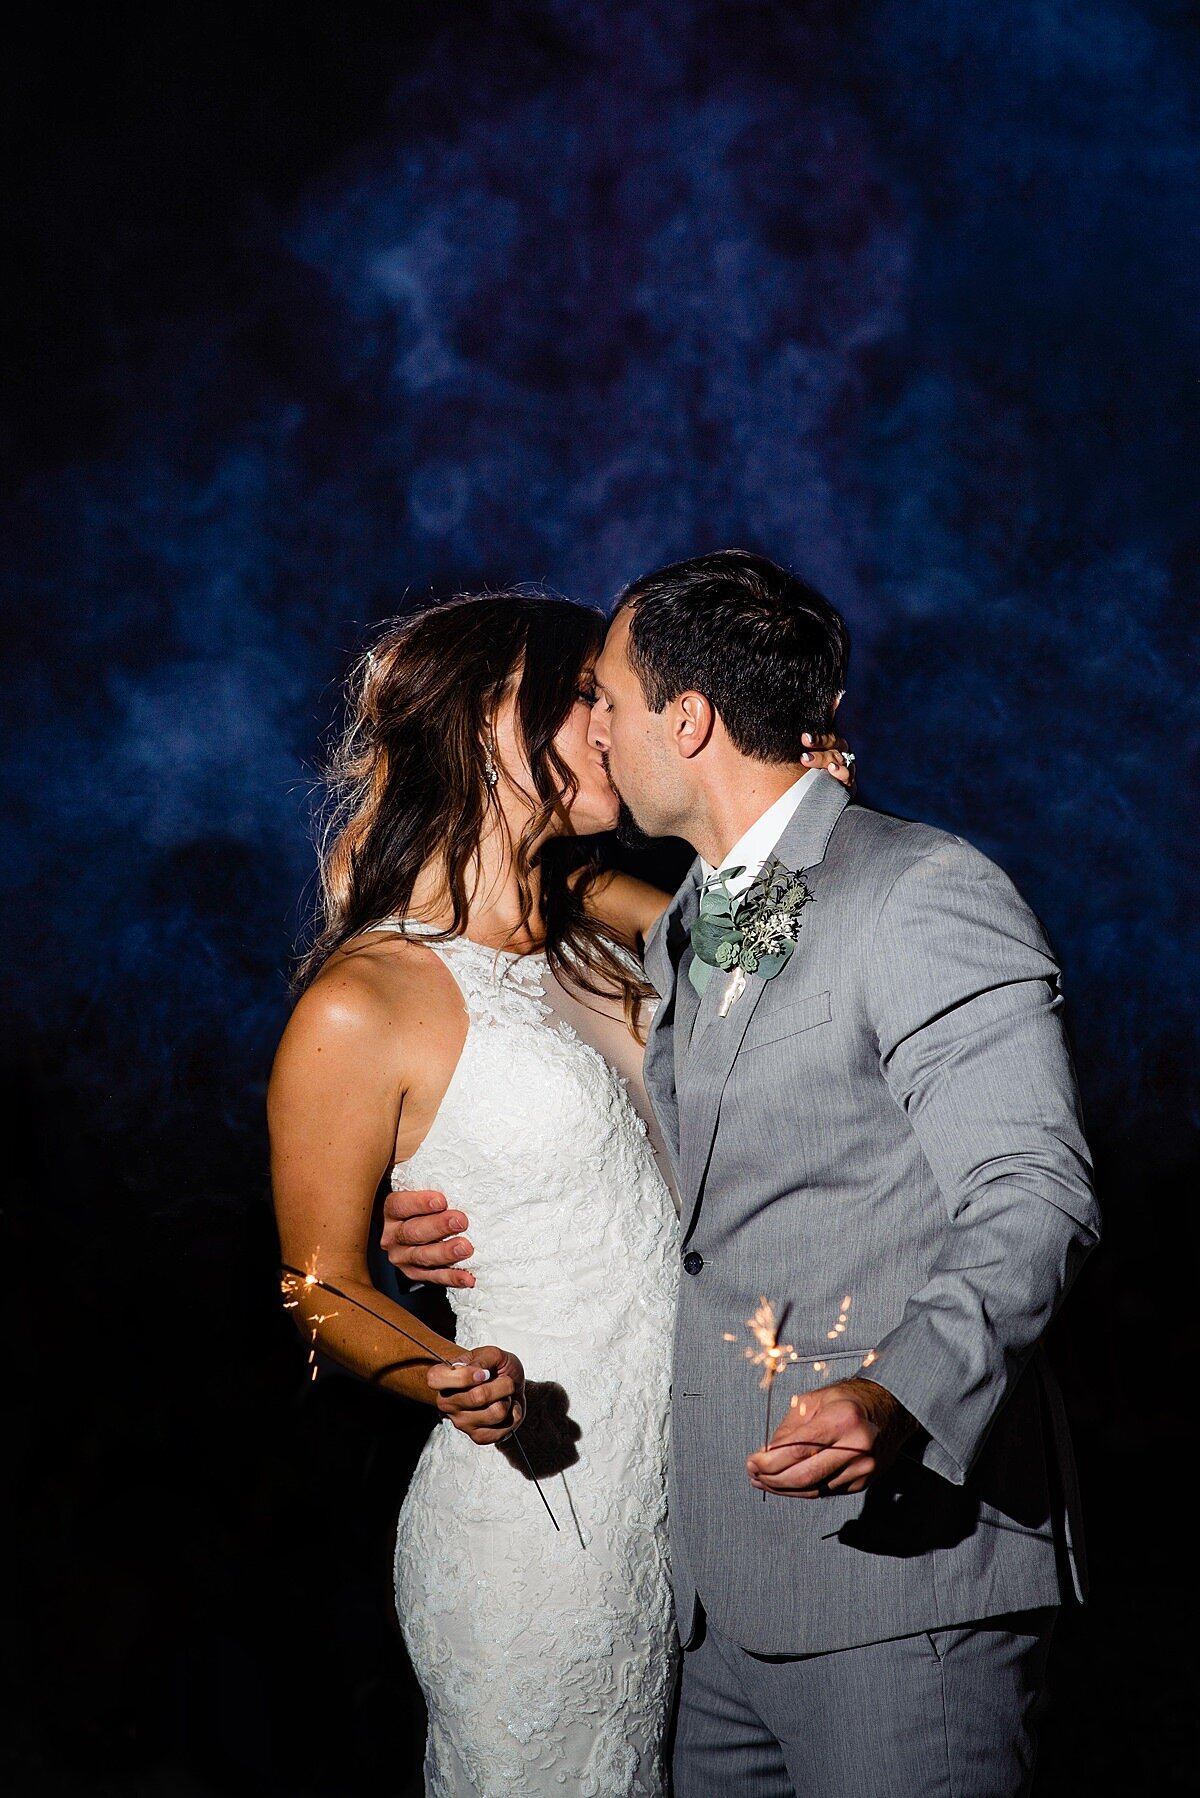 Bride and Groom sharing an end of the night kiss with sparklers and blue smoke behind them